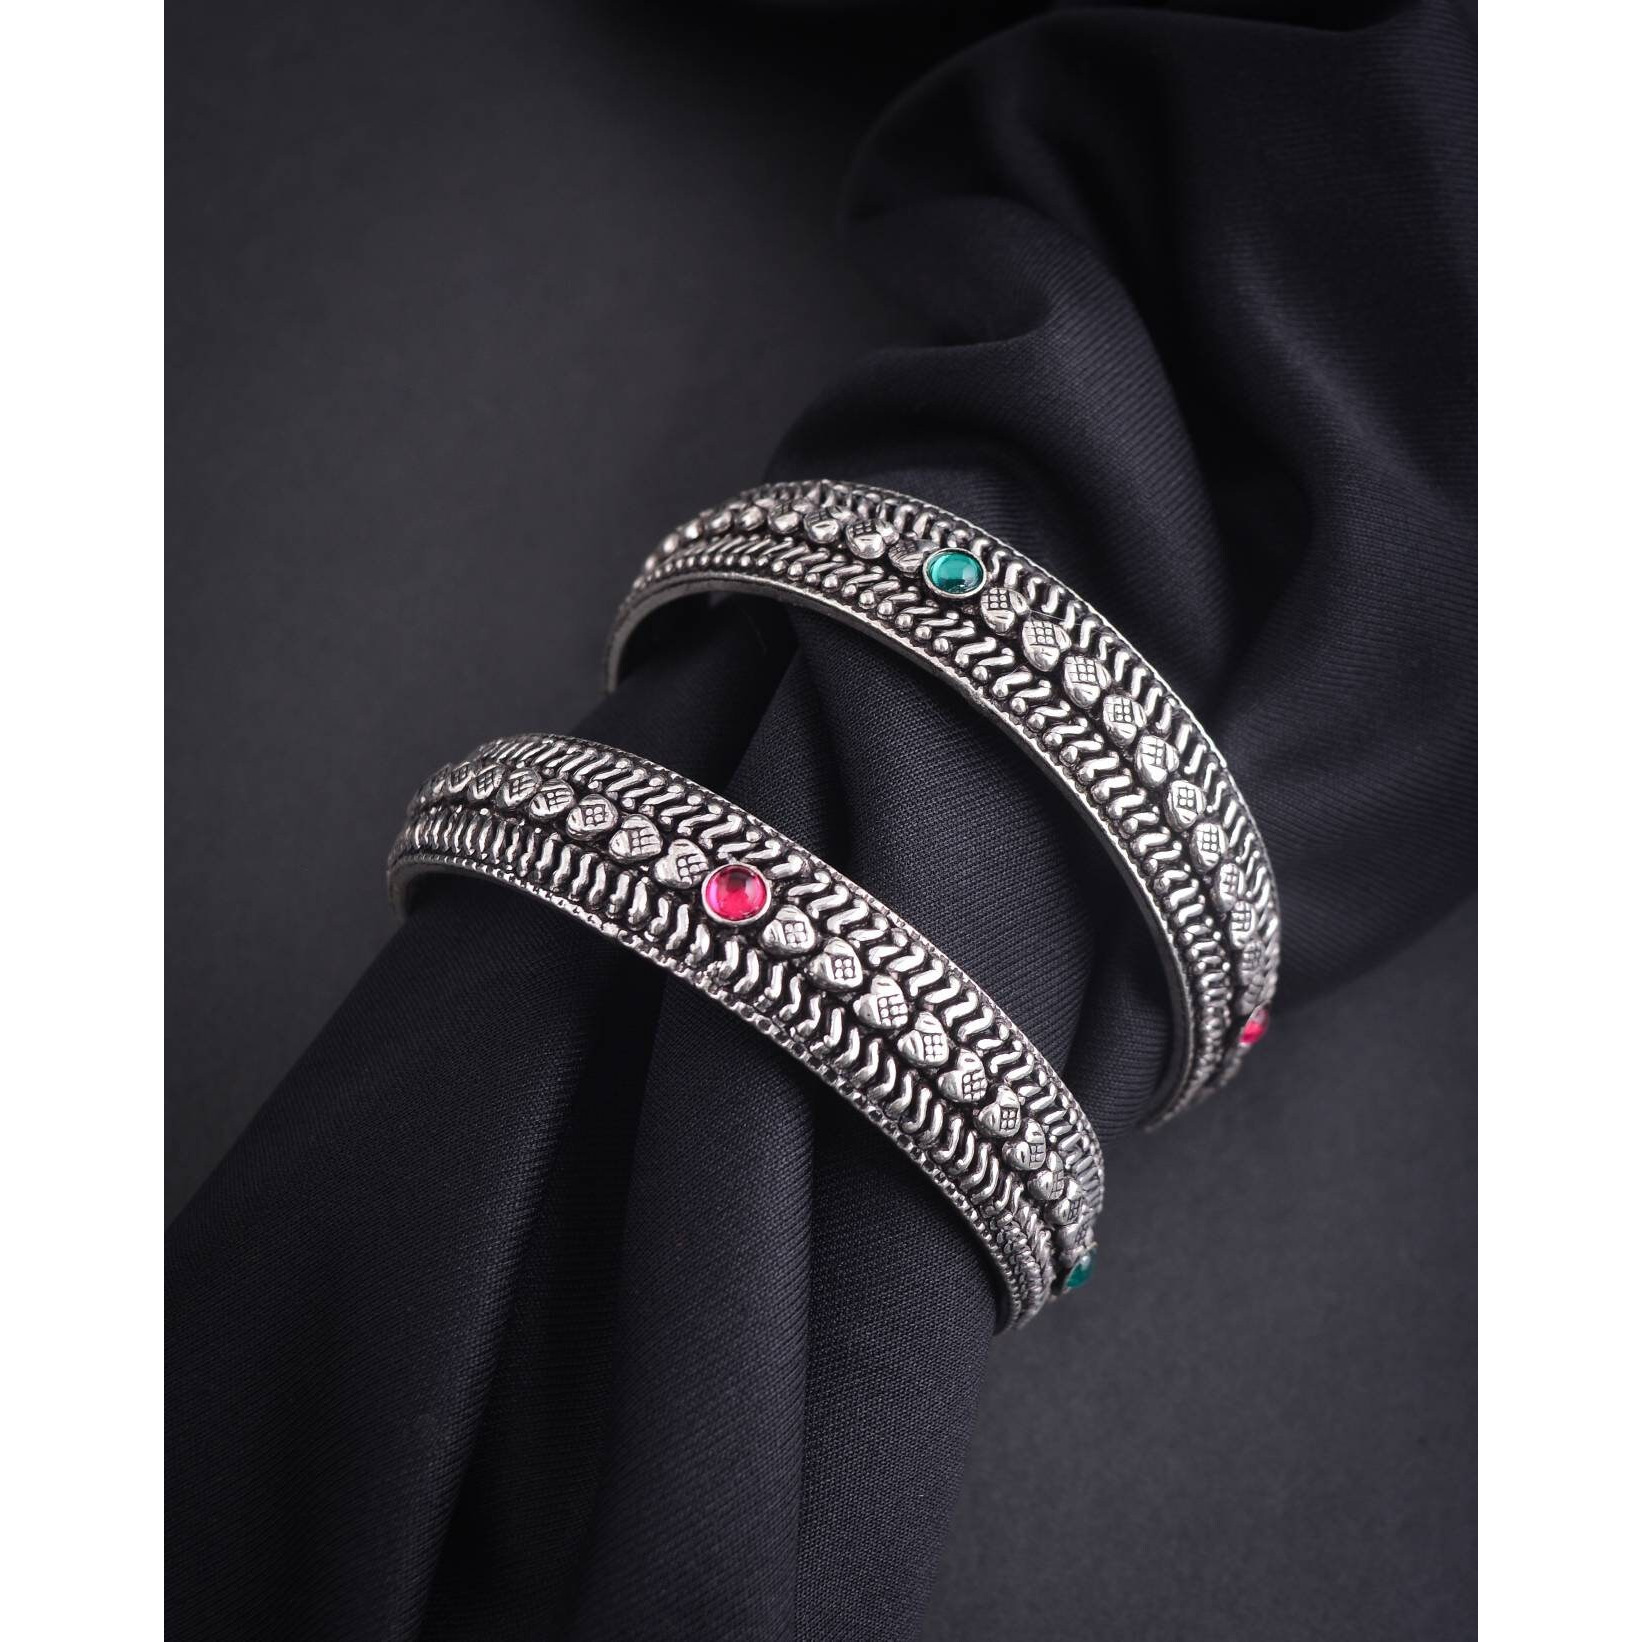 Listed as a must-have earring, jhumkis will always be a woman's favorite accessory! Our  Leaf Silver Oxidised Jhumkis are one to would opt for when you want the simple yet trendy look, pair these up with your straight kurtas or your soft mulmul sarees, these will leave you feeling pretty all day long!